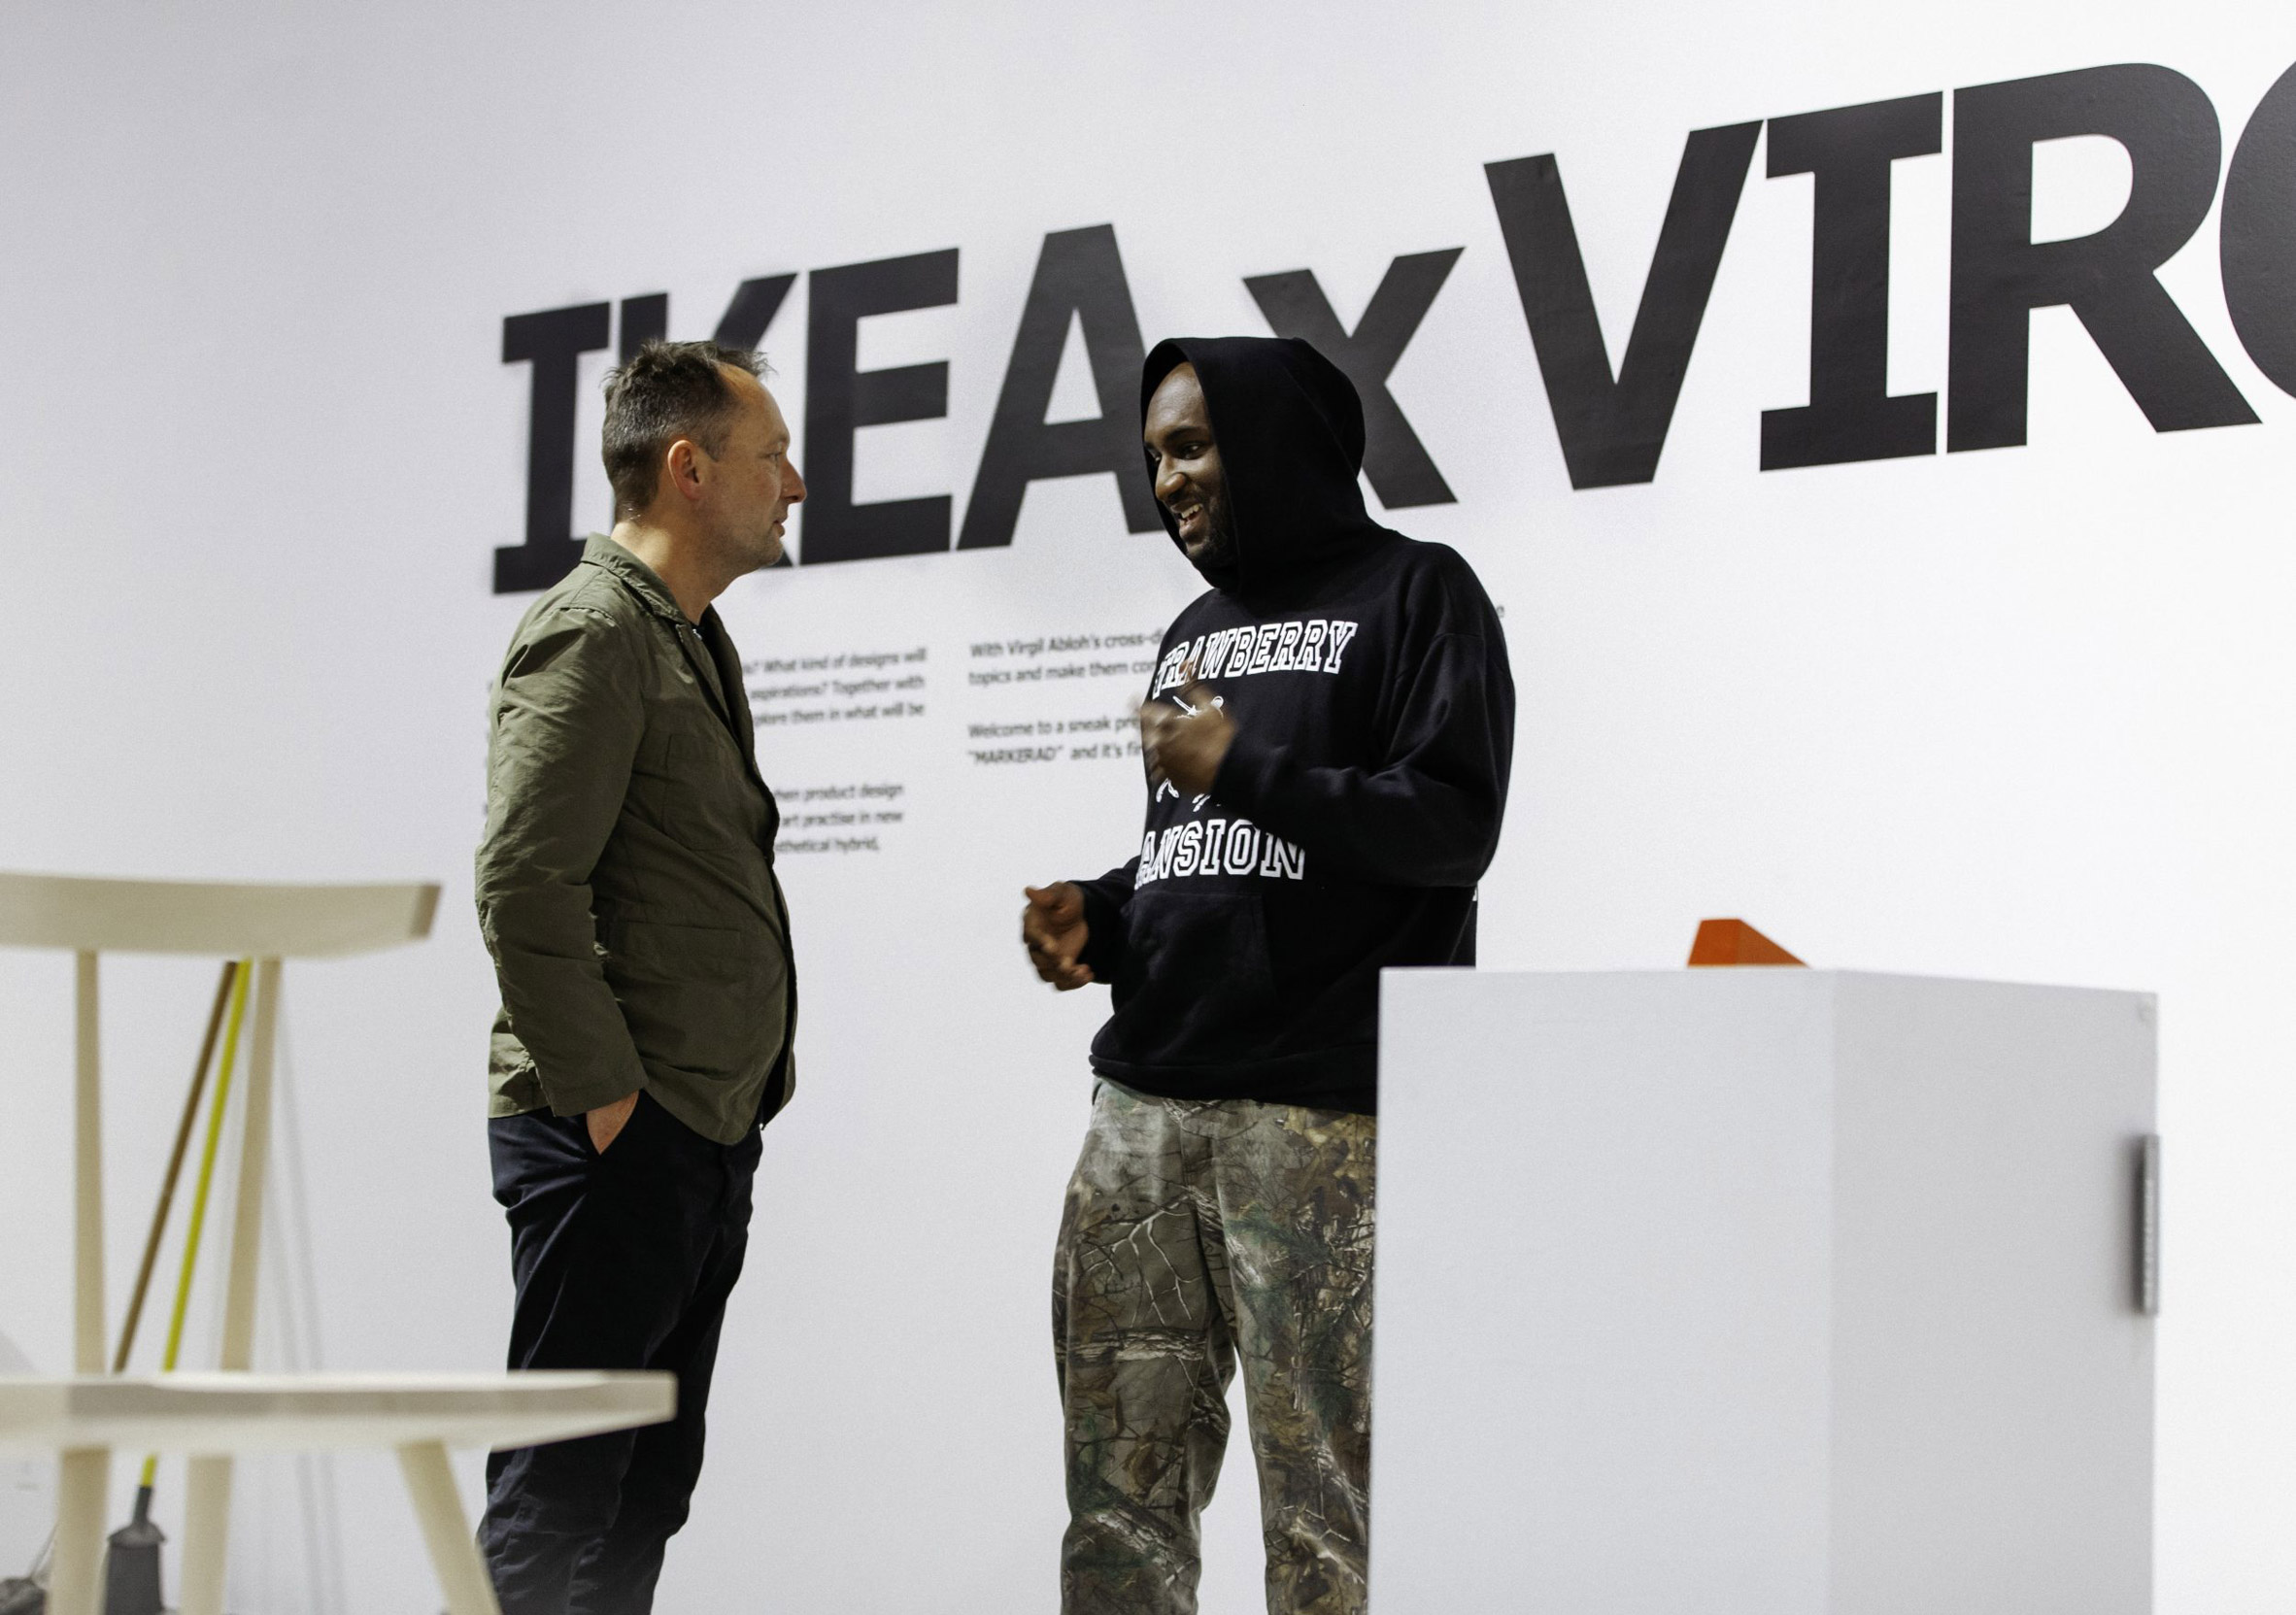 Four highly-covetable rug designs from Virgil Abloh's Ikea